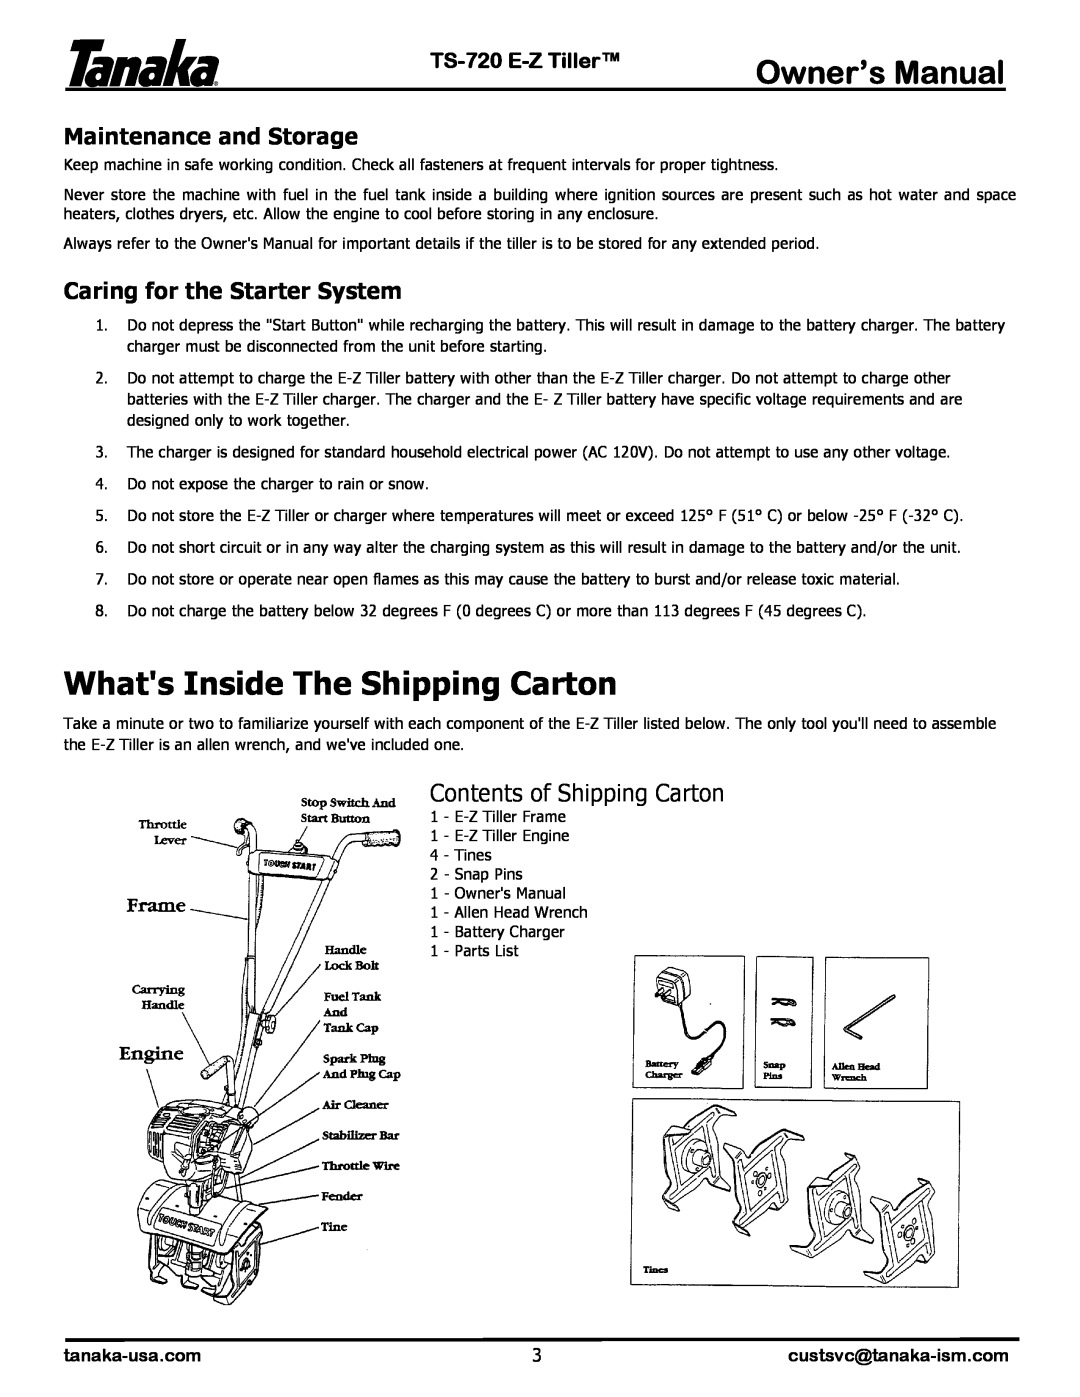 Tanaka manual Whats Inside The Shipping Carton, Maintenance and Storage, Caring for the Starter System, TS-720 E-ZTiller 